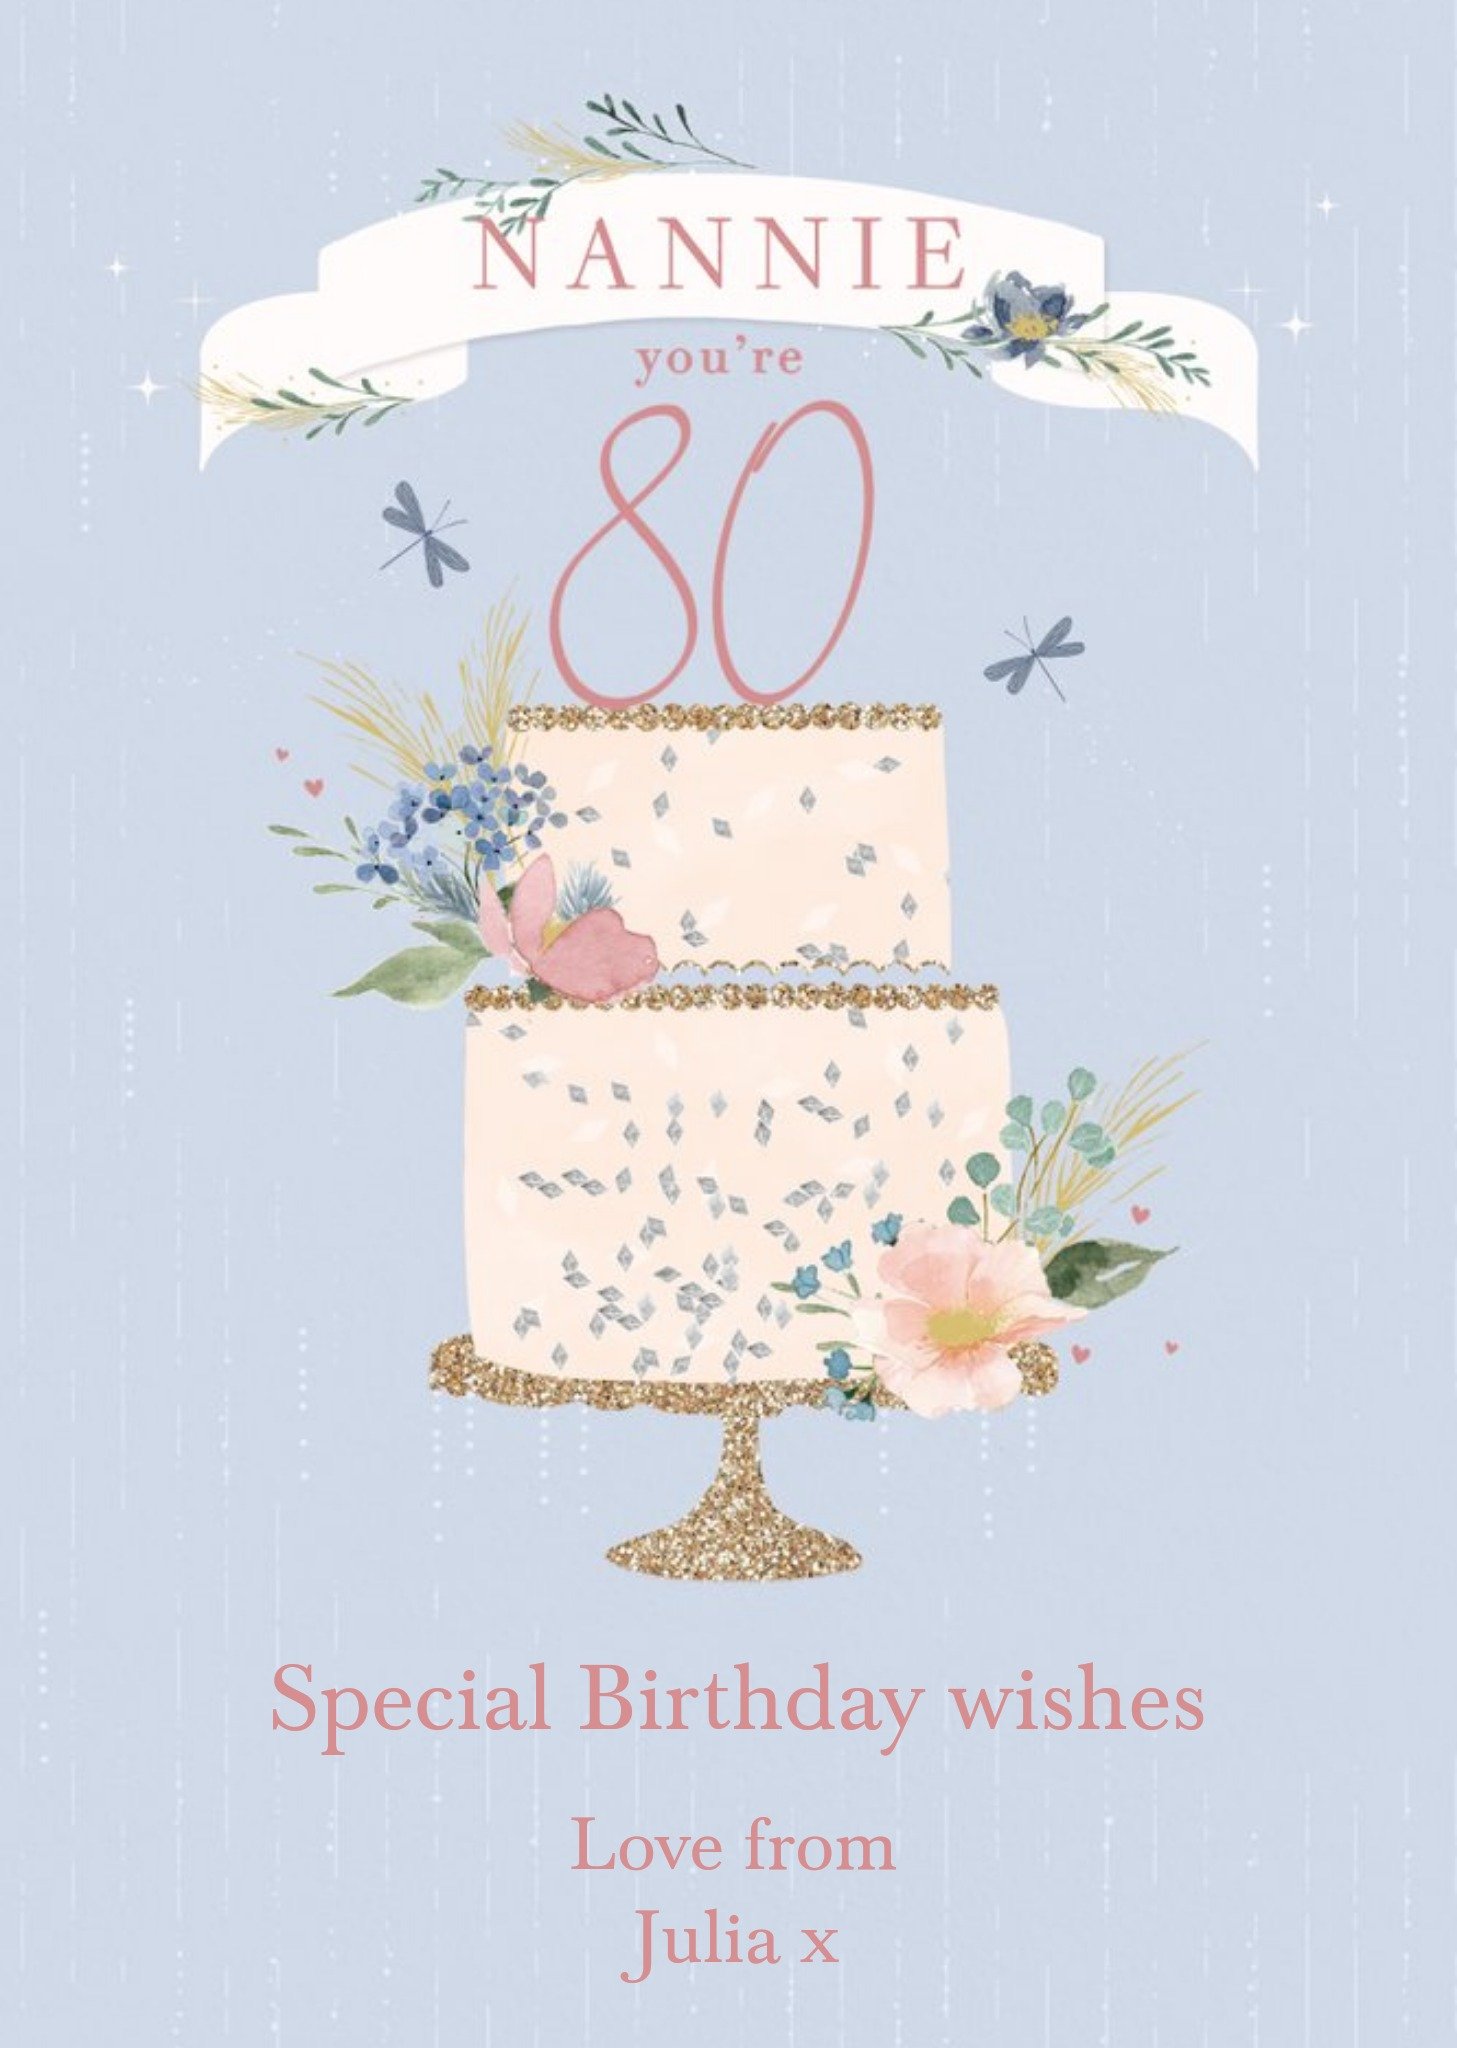 Moonpig Clintons Nannie Watercolour Floral Cake 80th Birthday Card, Large